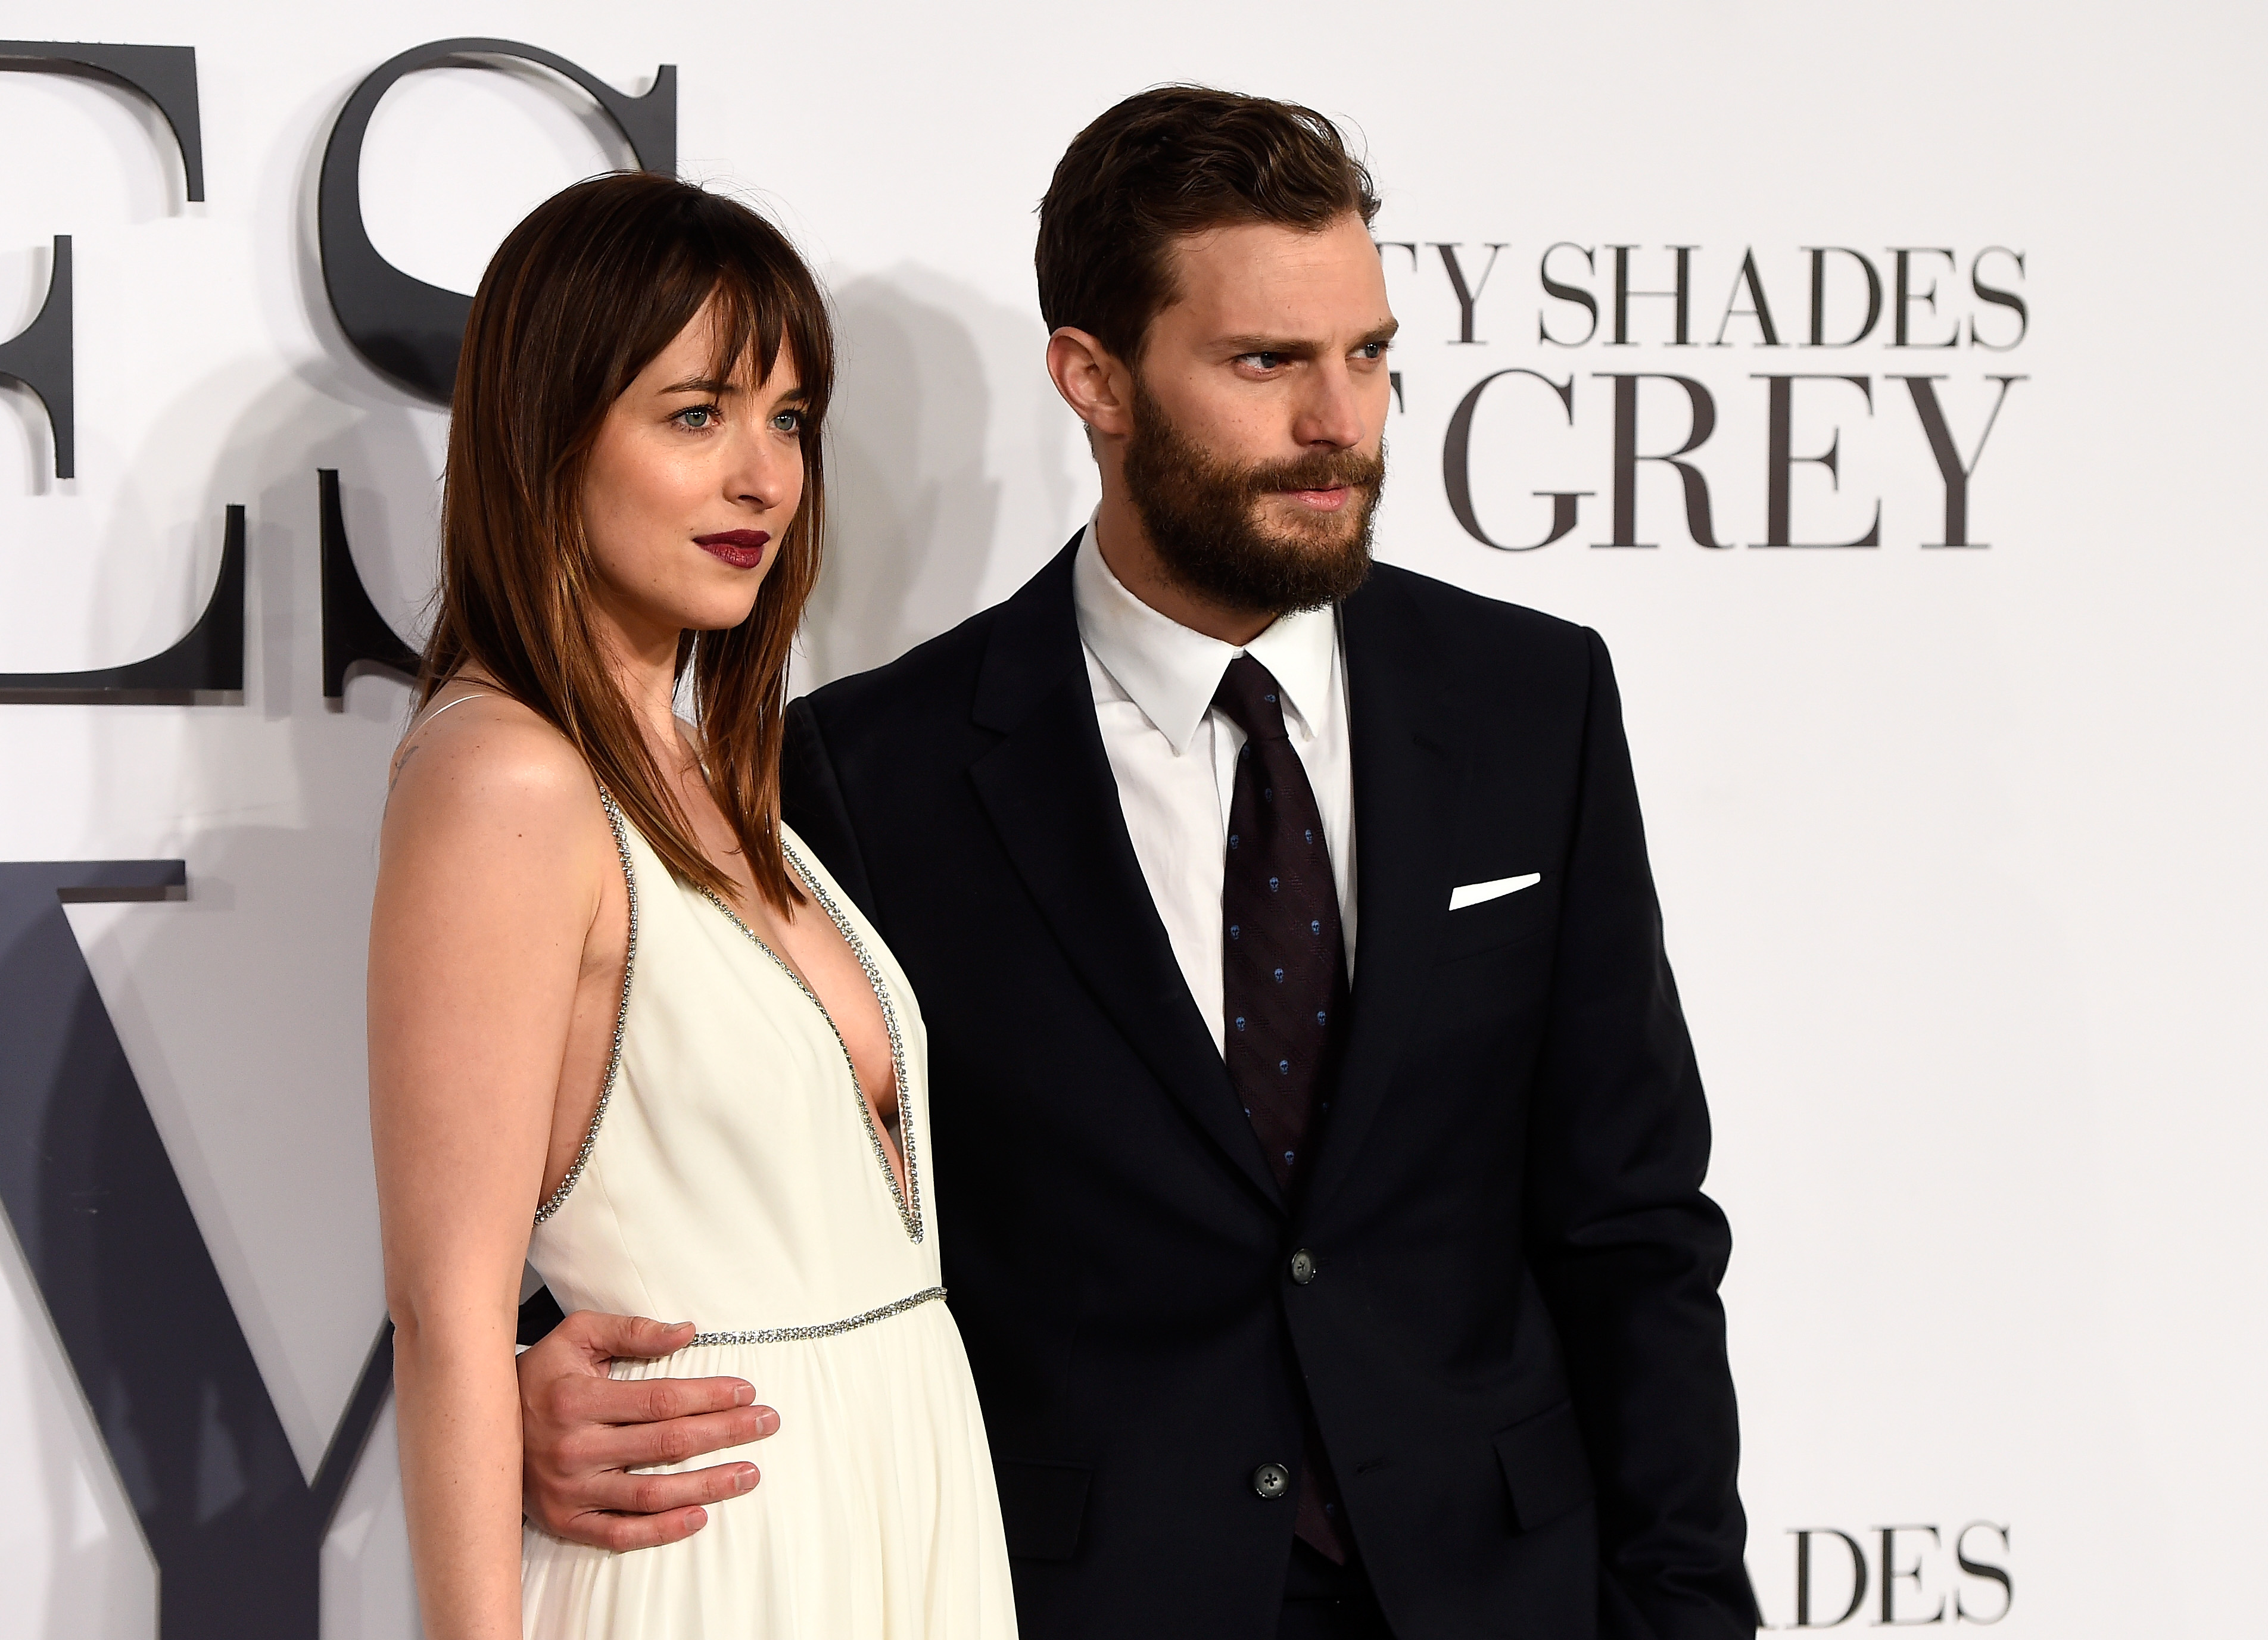 11 'Fifty Shades' Costumes For You Daring Couples.